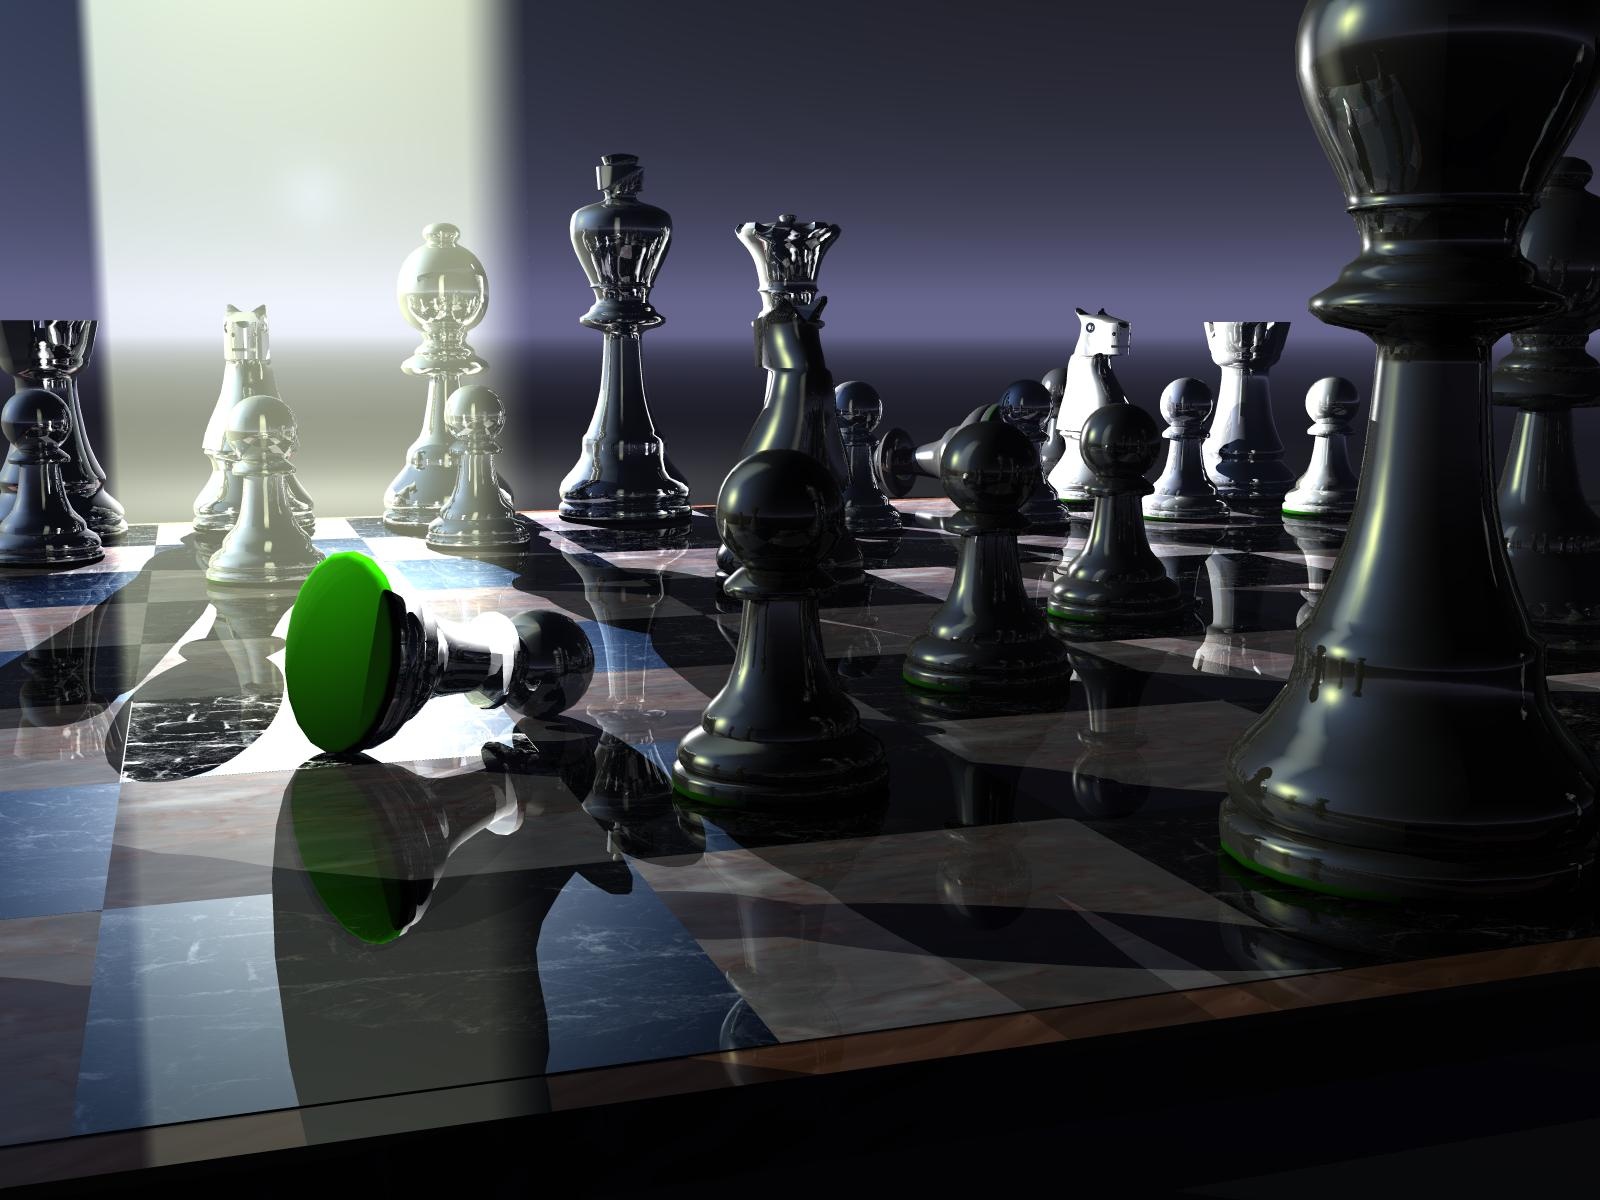 Playing Chess - Other & Anime Background Wallpapers on Desktop Nexus (Image  1527796)